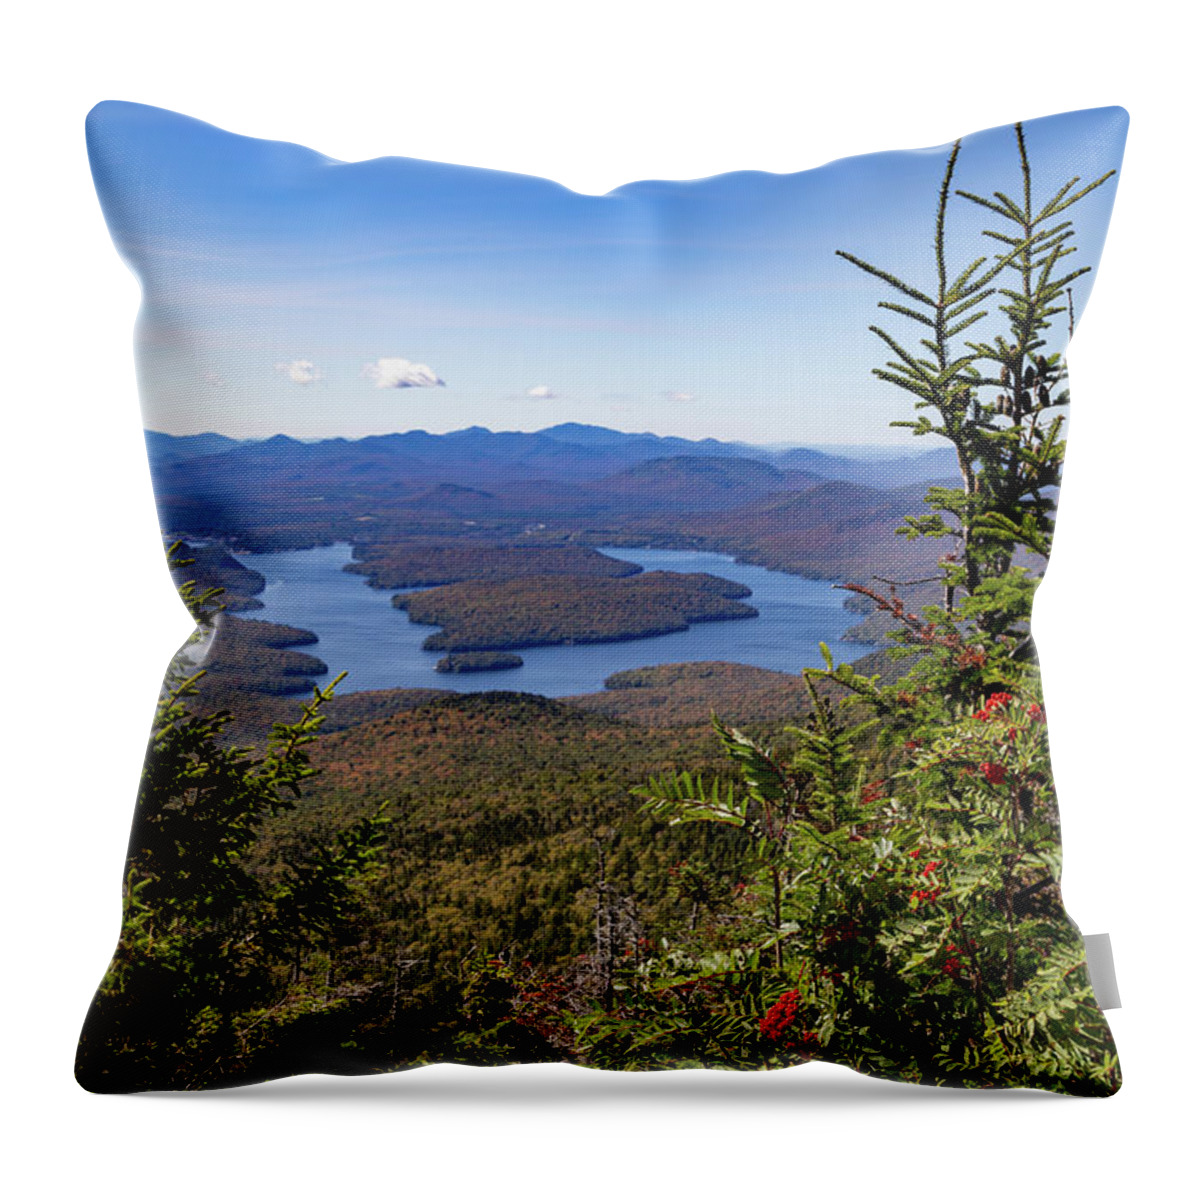 Lake Placid Throw Pillow featuring the photograph Lake Placid by Cindy Robinson